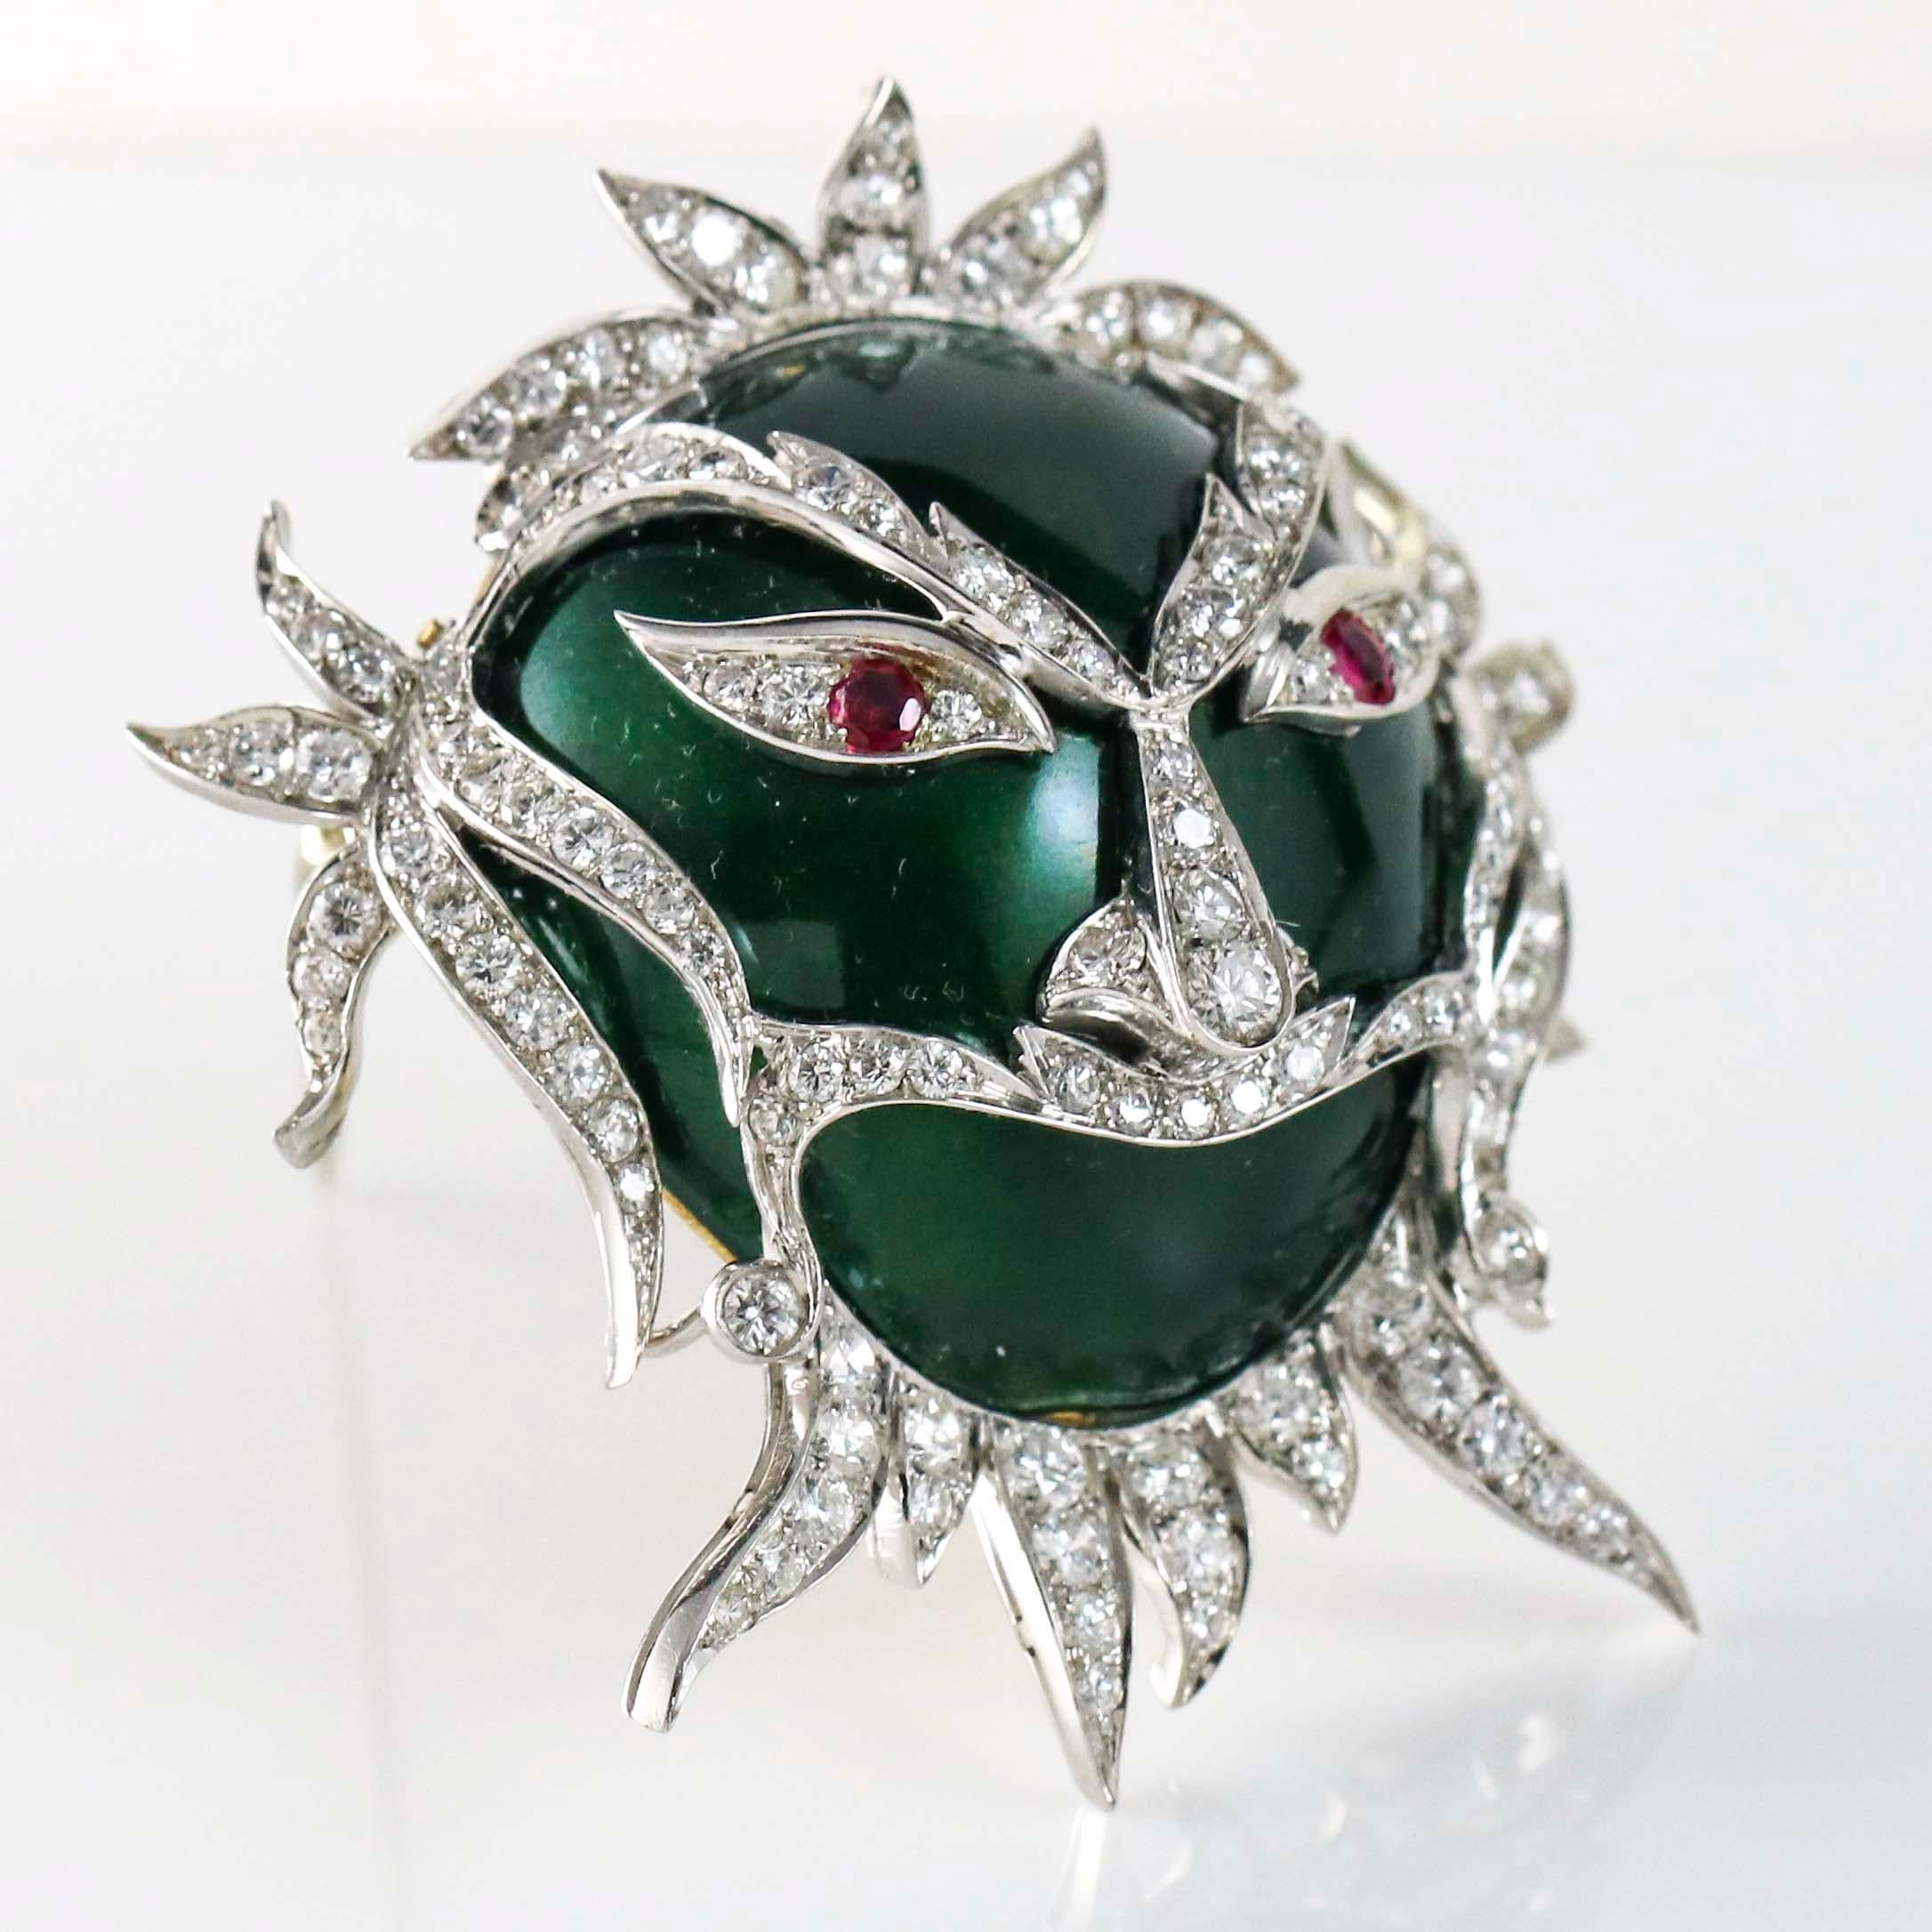 Carnival ornate face mask brooch crafted in 18k white and yellow gold with green enamel, ruby eyes and diamond details. Diamond total carat weight, 3 carats.